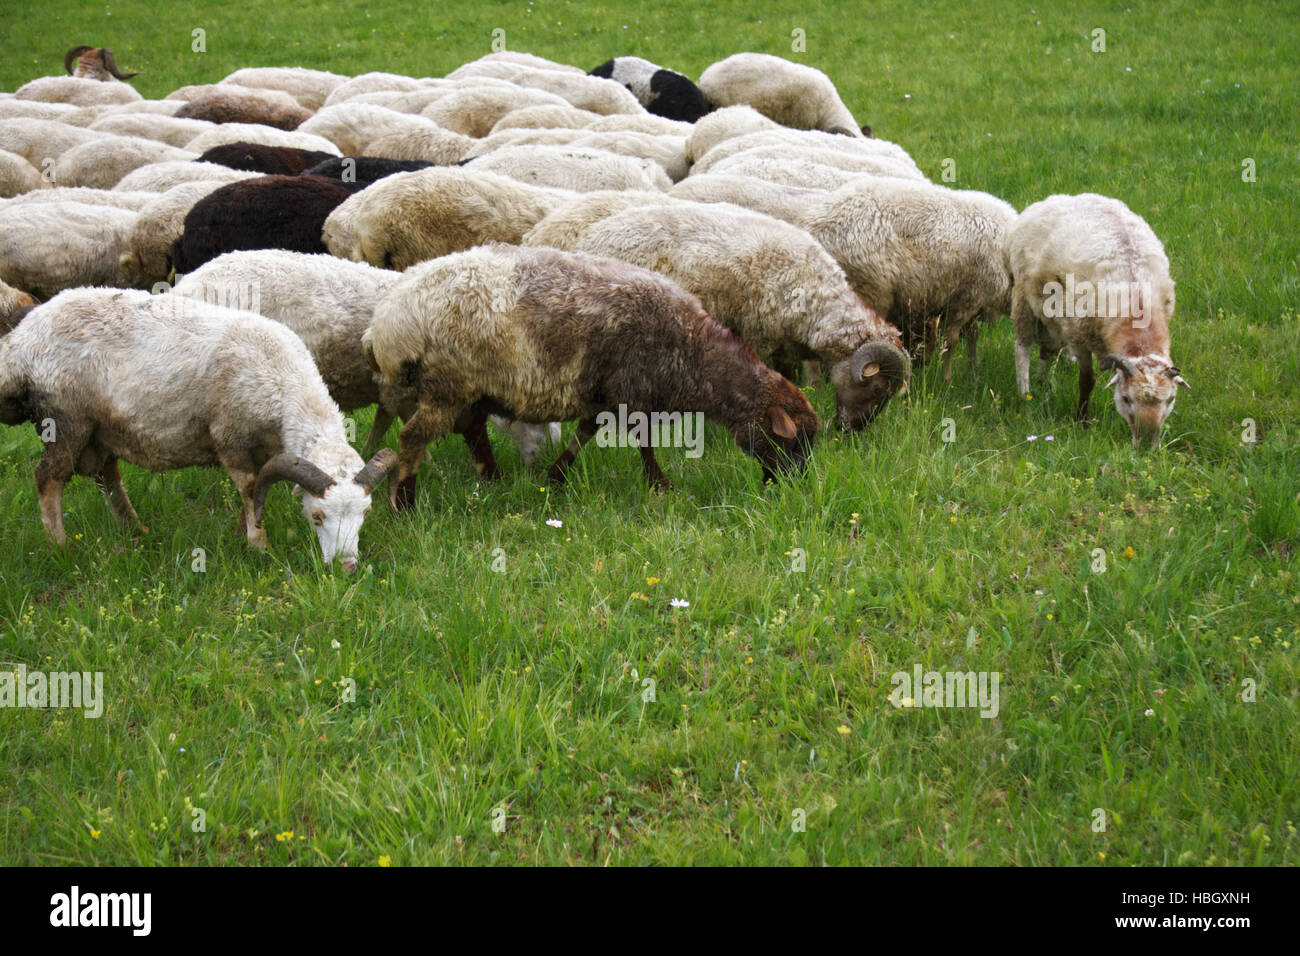 Sheeps on the grass Stock Photo